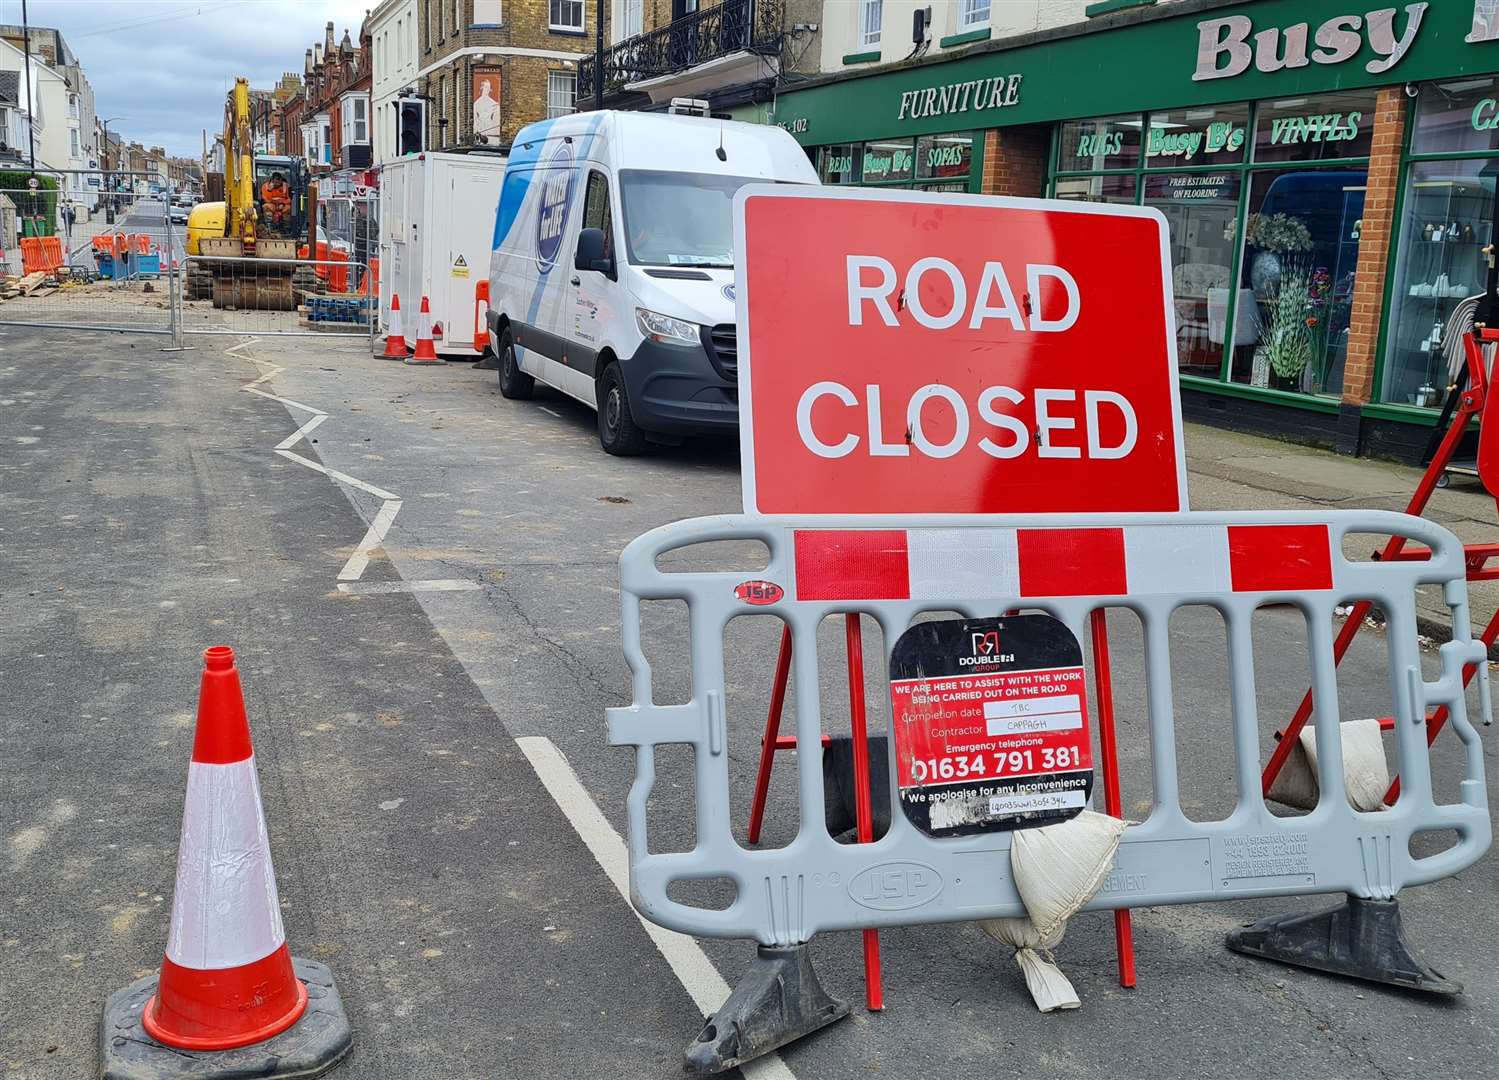 Herne Bay High Street has been partially closed for sewer repair works and Southern Water cannot say when they will end